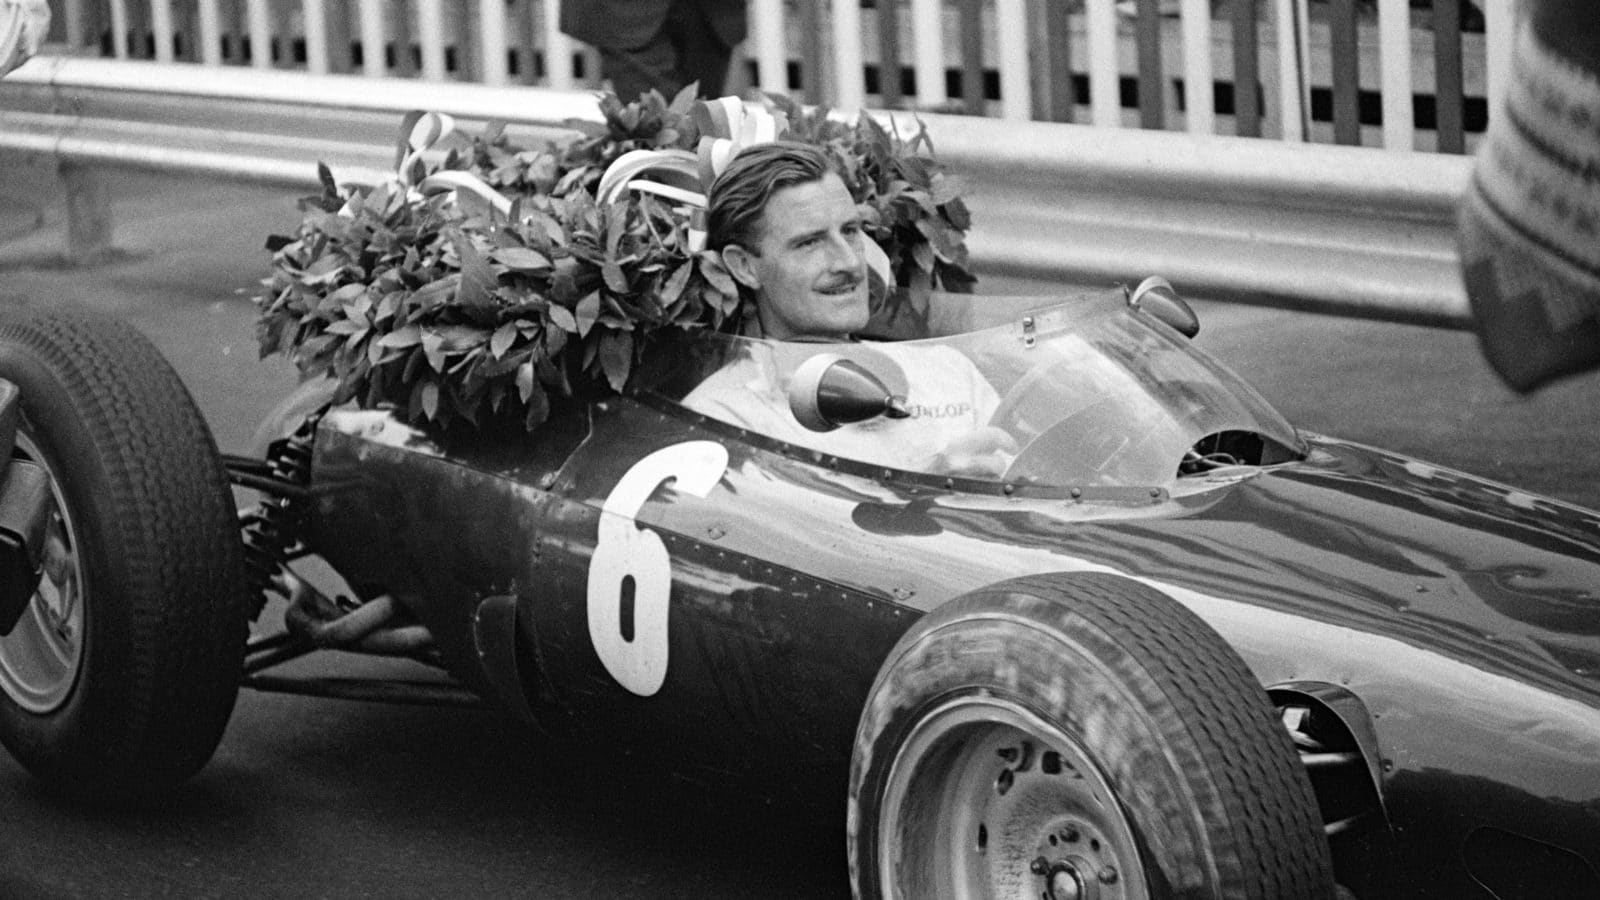 Graham Hill in behind the wheel